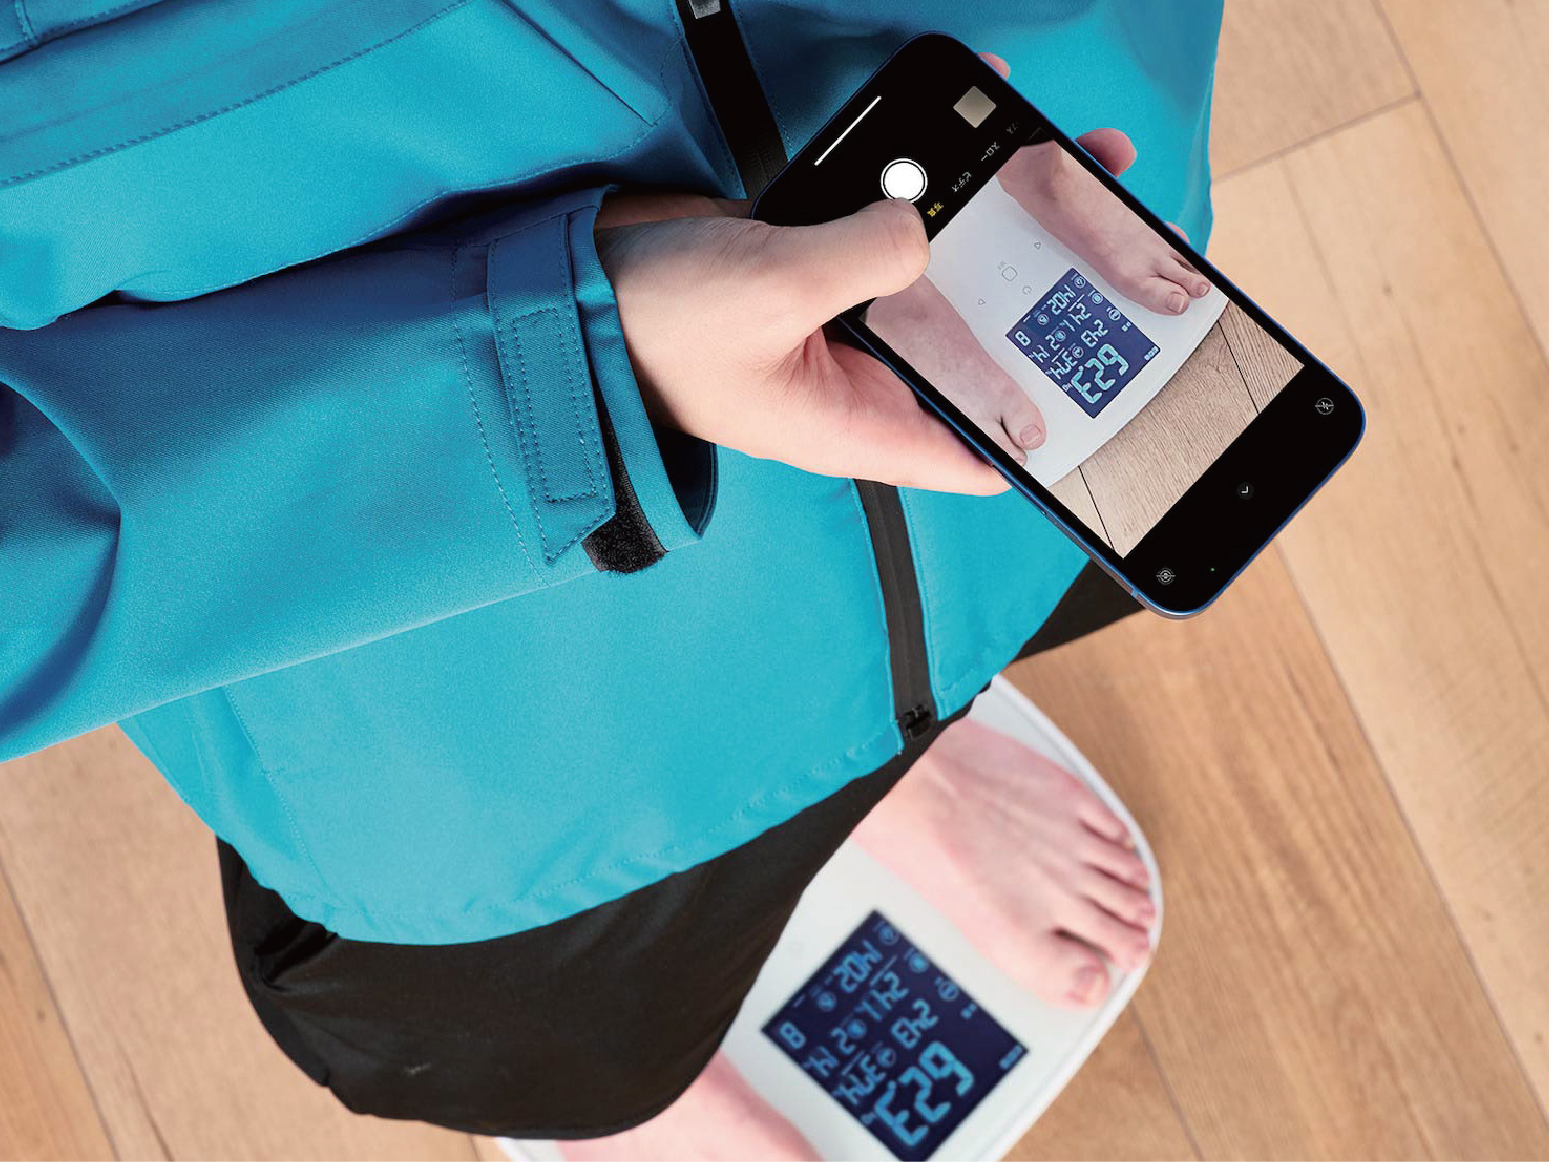 "ECLEAR" Big LCD Body composition meter